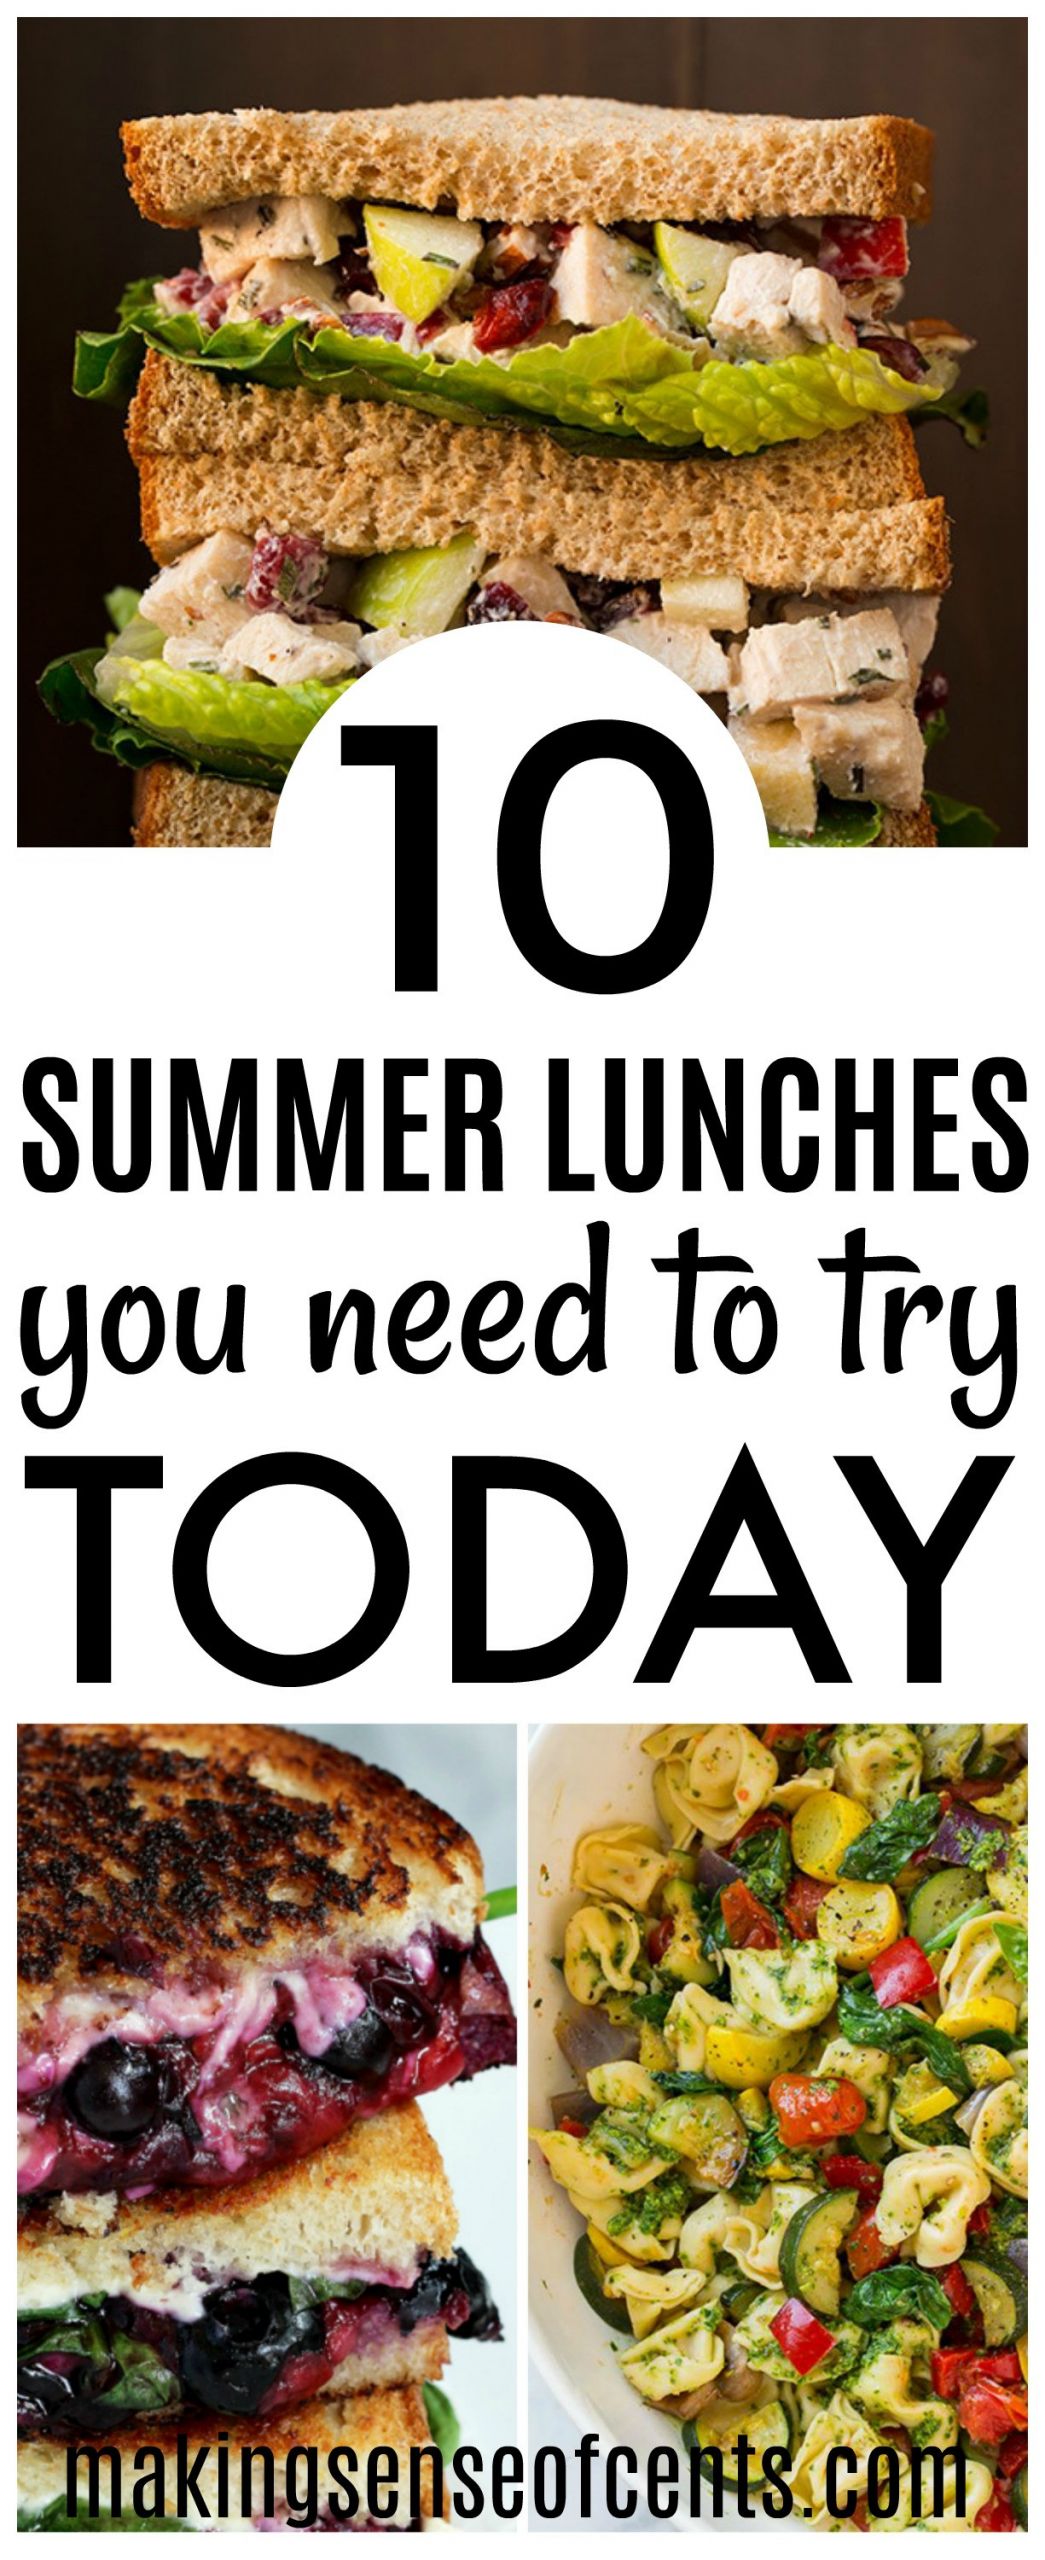 Summer Lunch Party Menu Ideas
 10 Delicious Summer Lunch Ideas Summer Meals You Need To